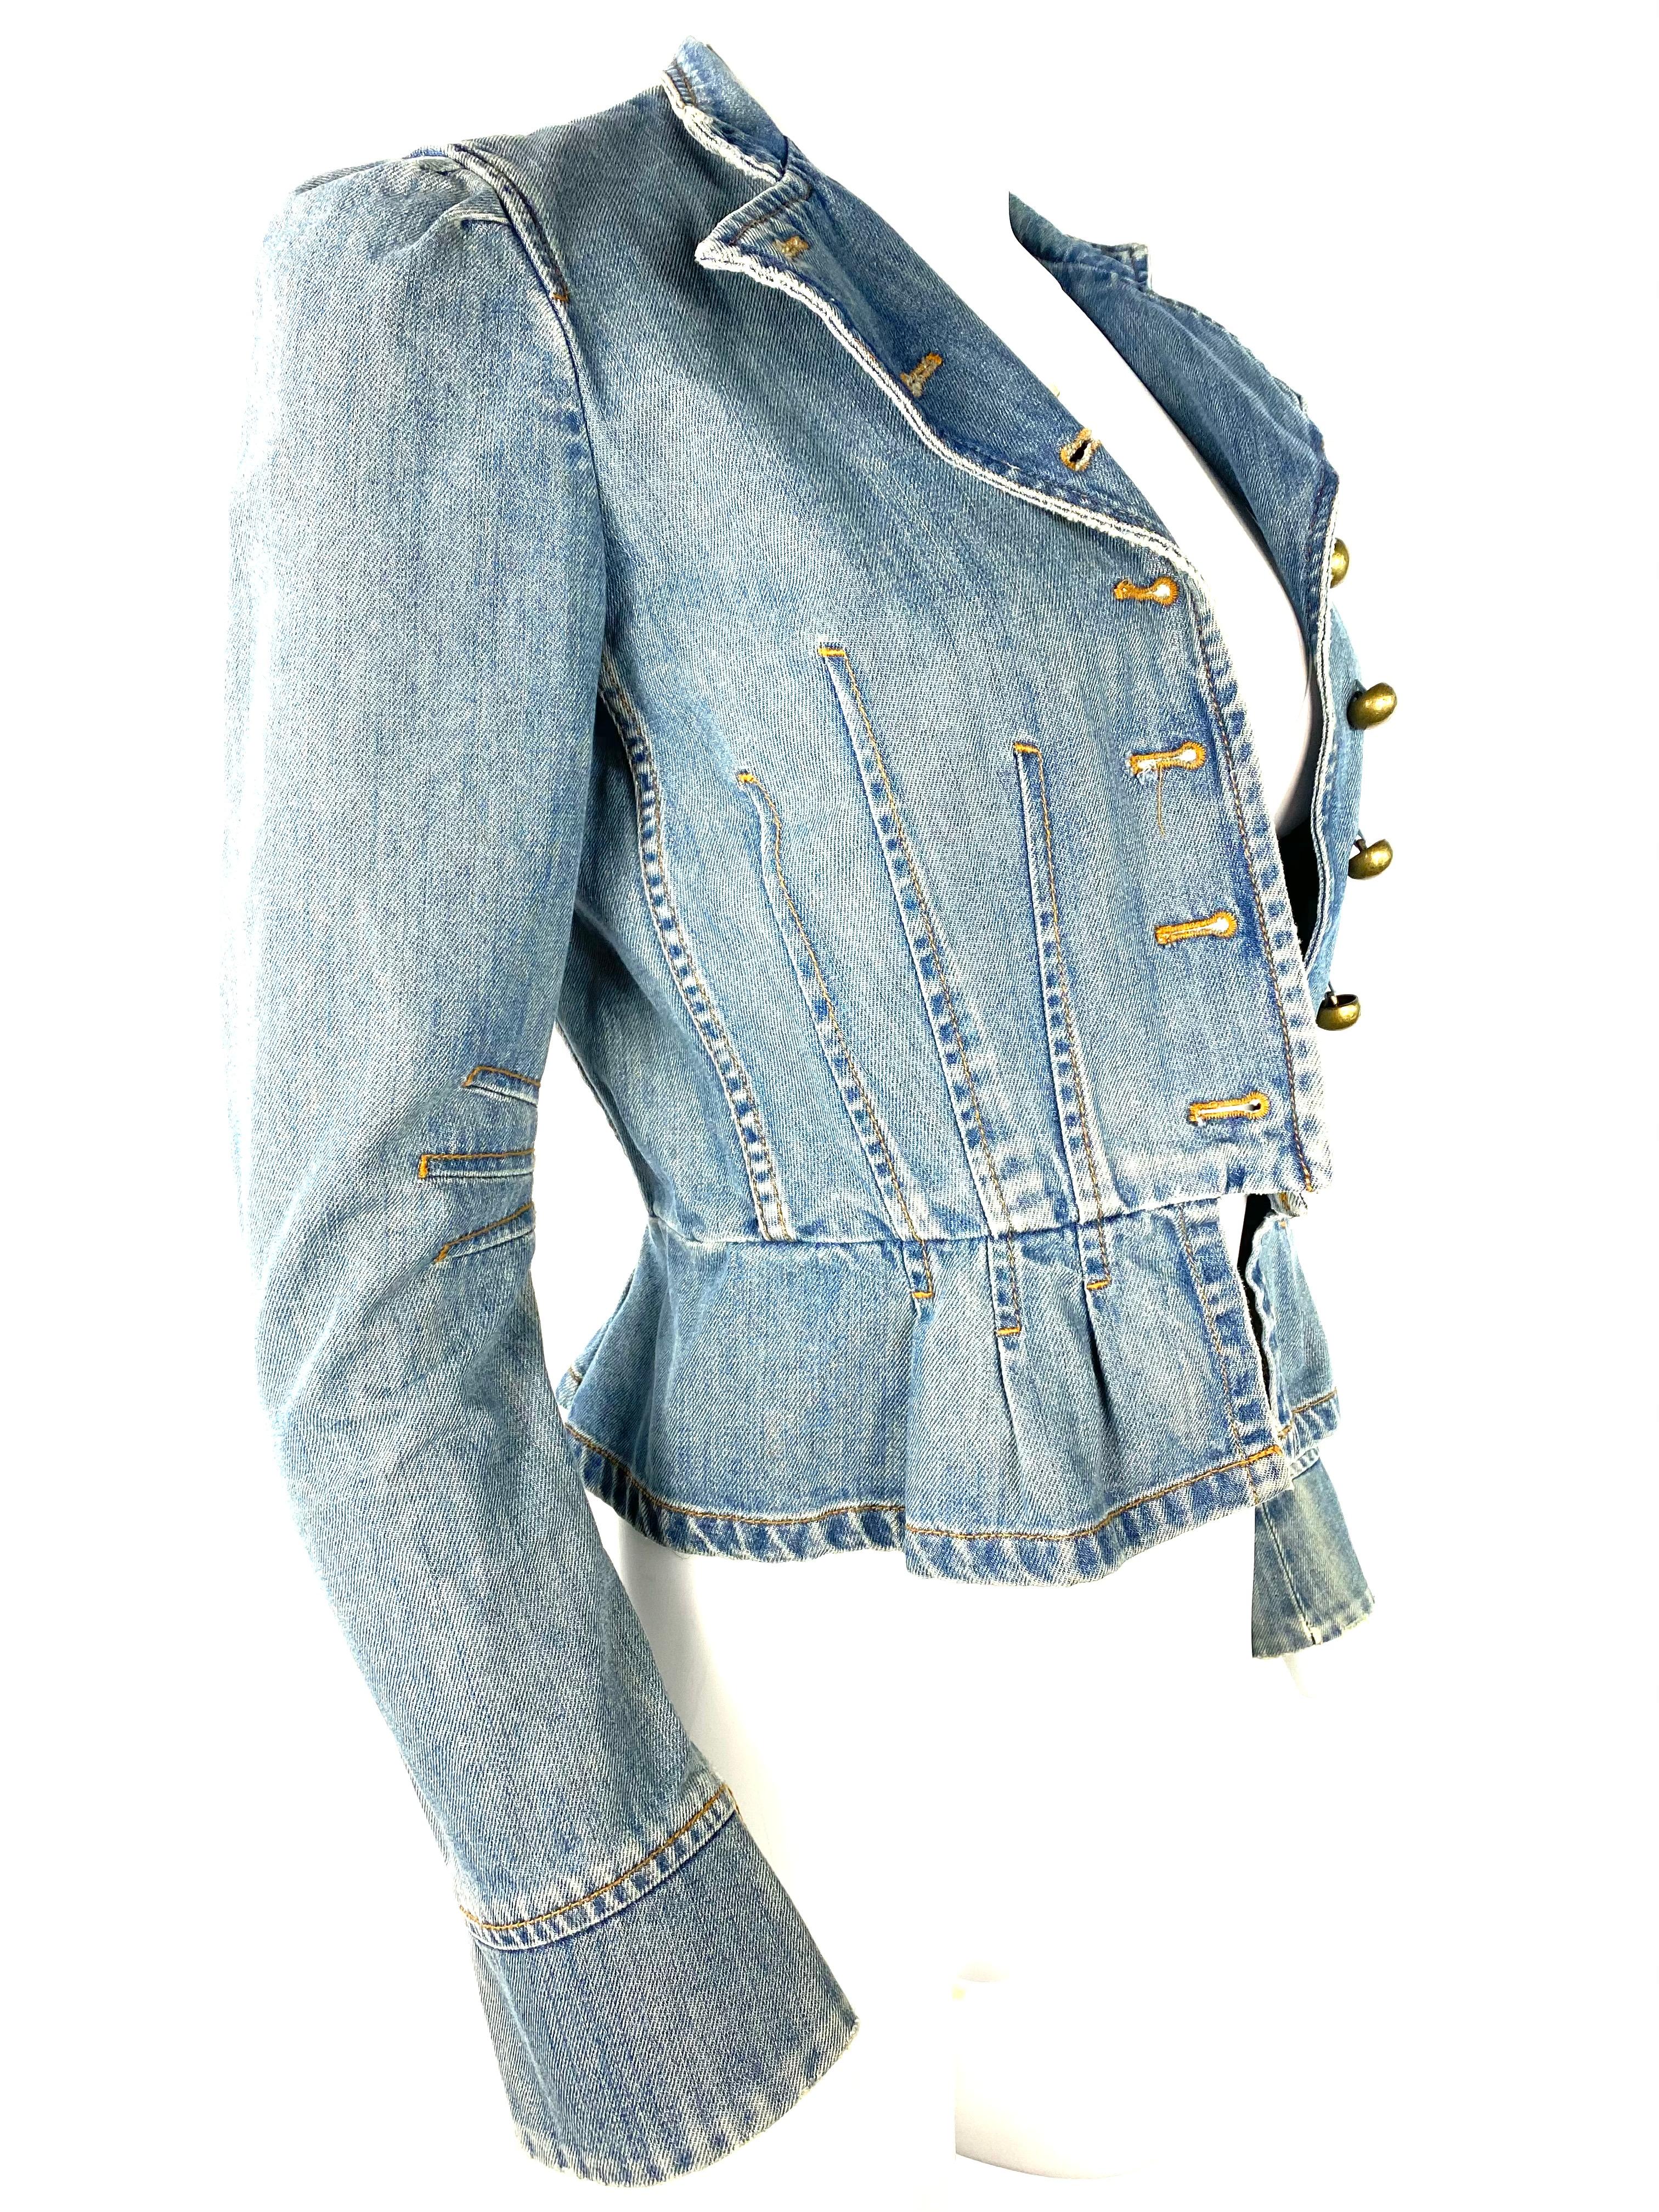 Product details:

Featuring blue light wash 100% cotton denim jacket with front seven gold tone ball button closure and flare detail on the bottom designed by Marc Jacobs.